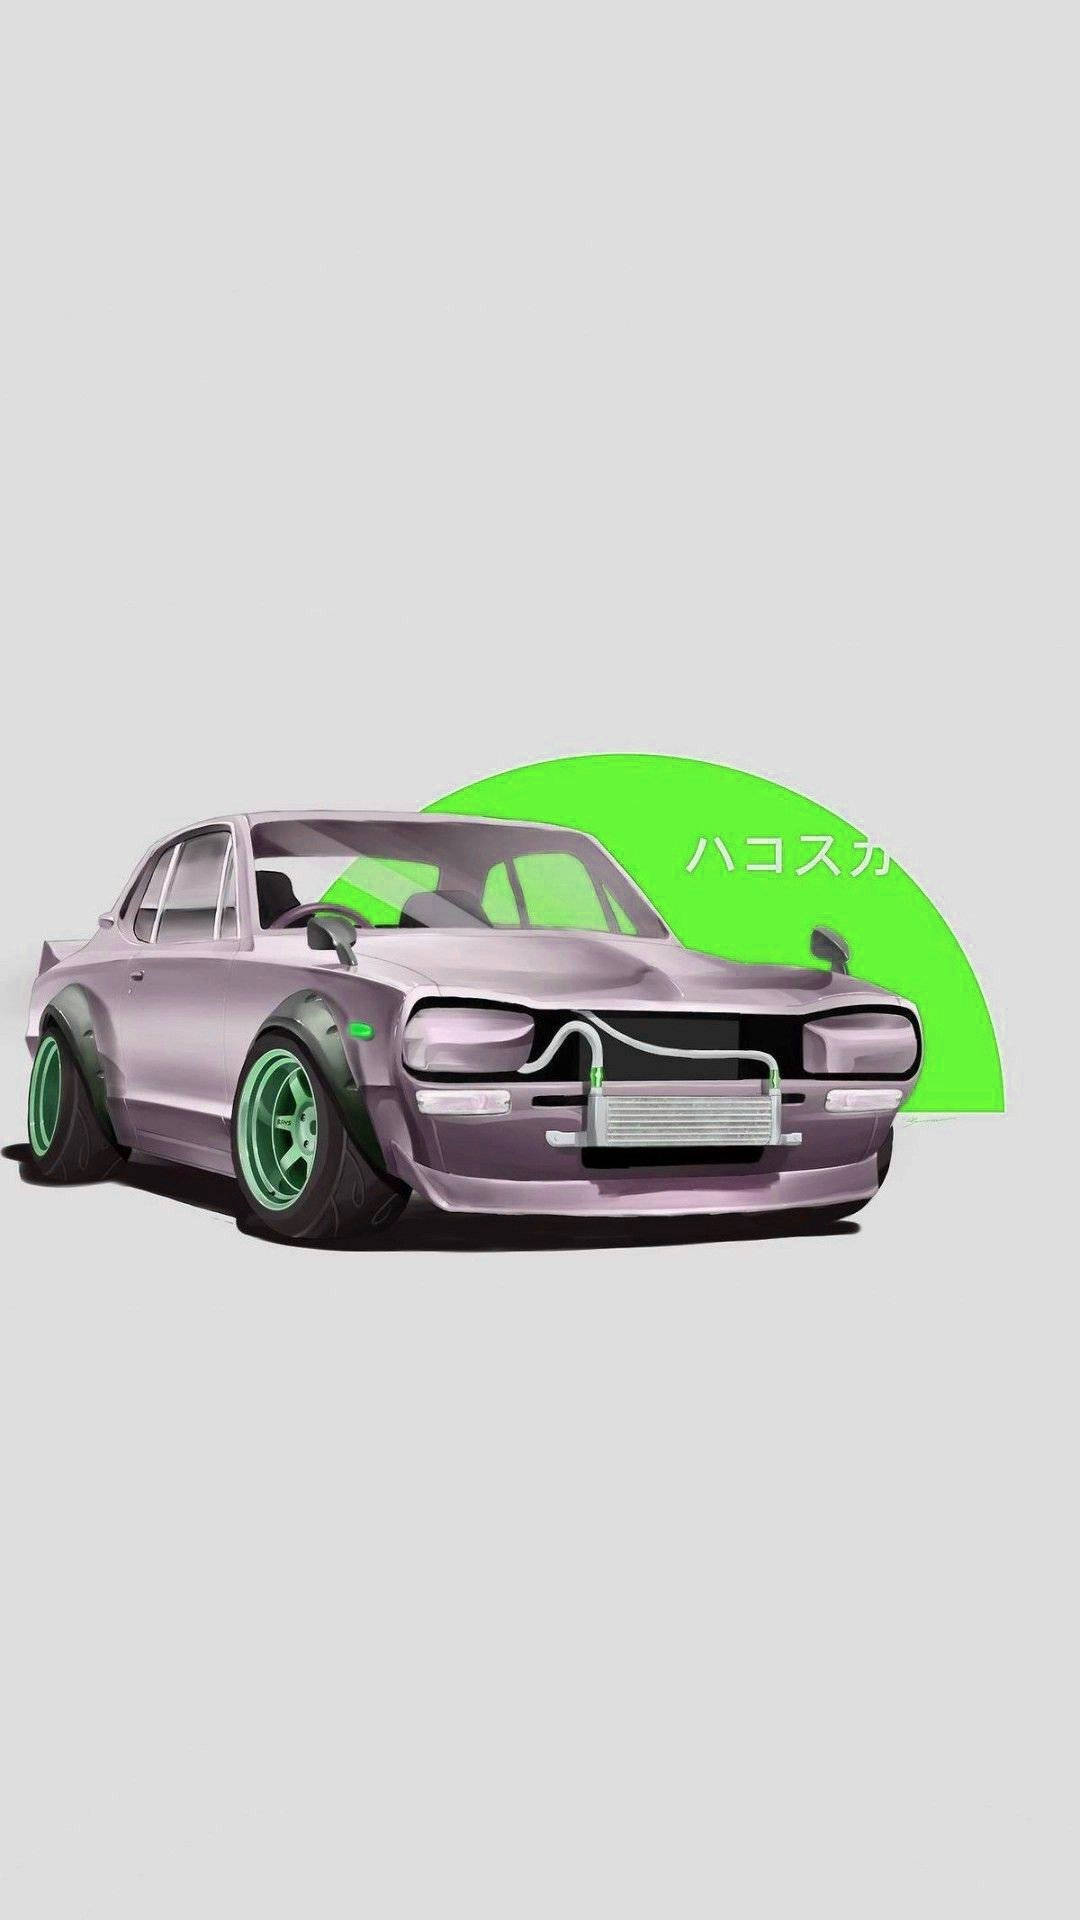 Jdm Car With Neon Green Sunset Background